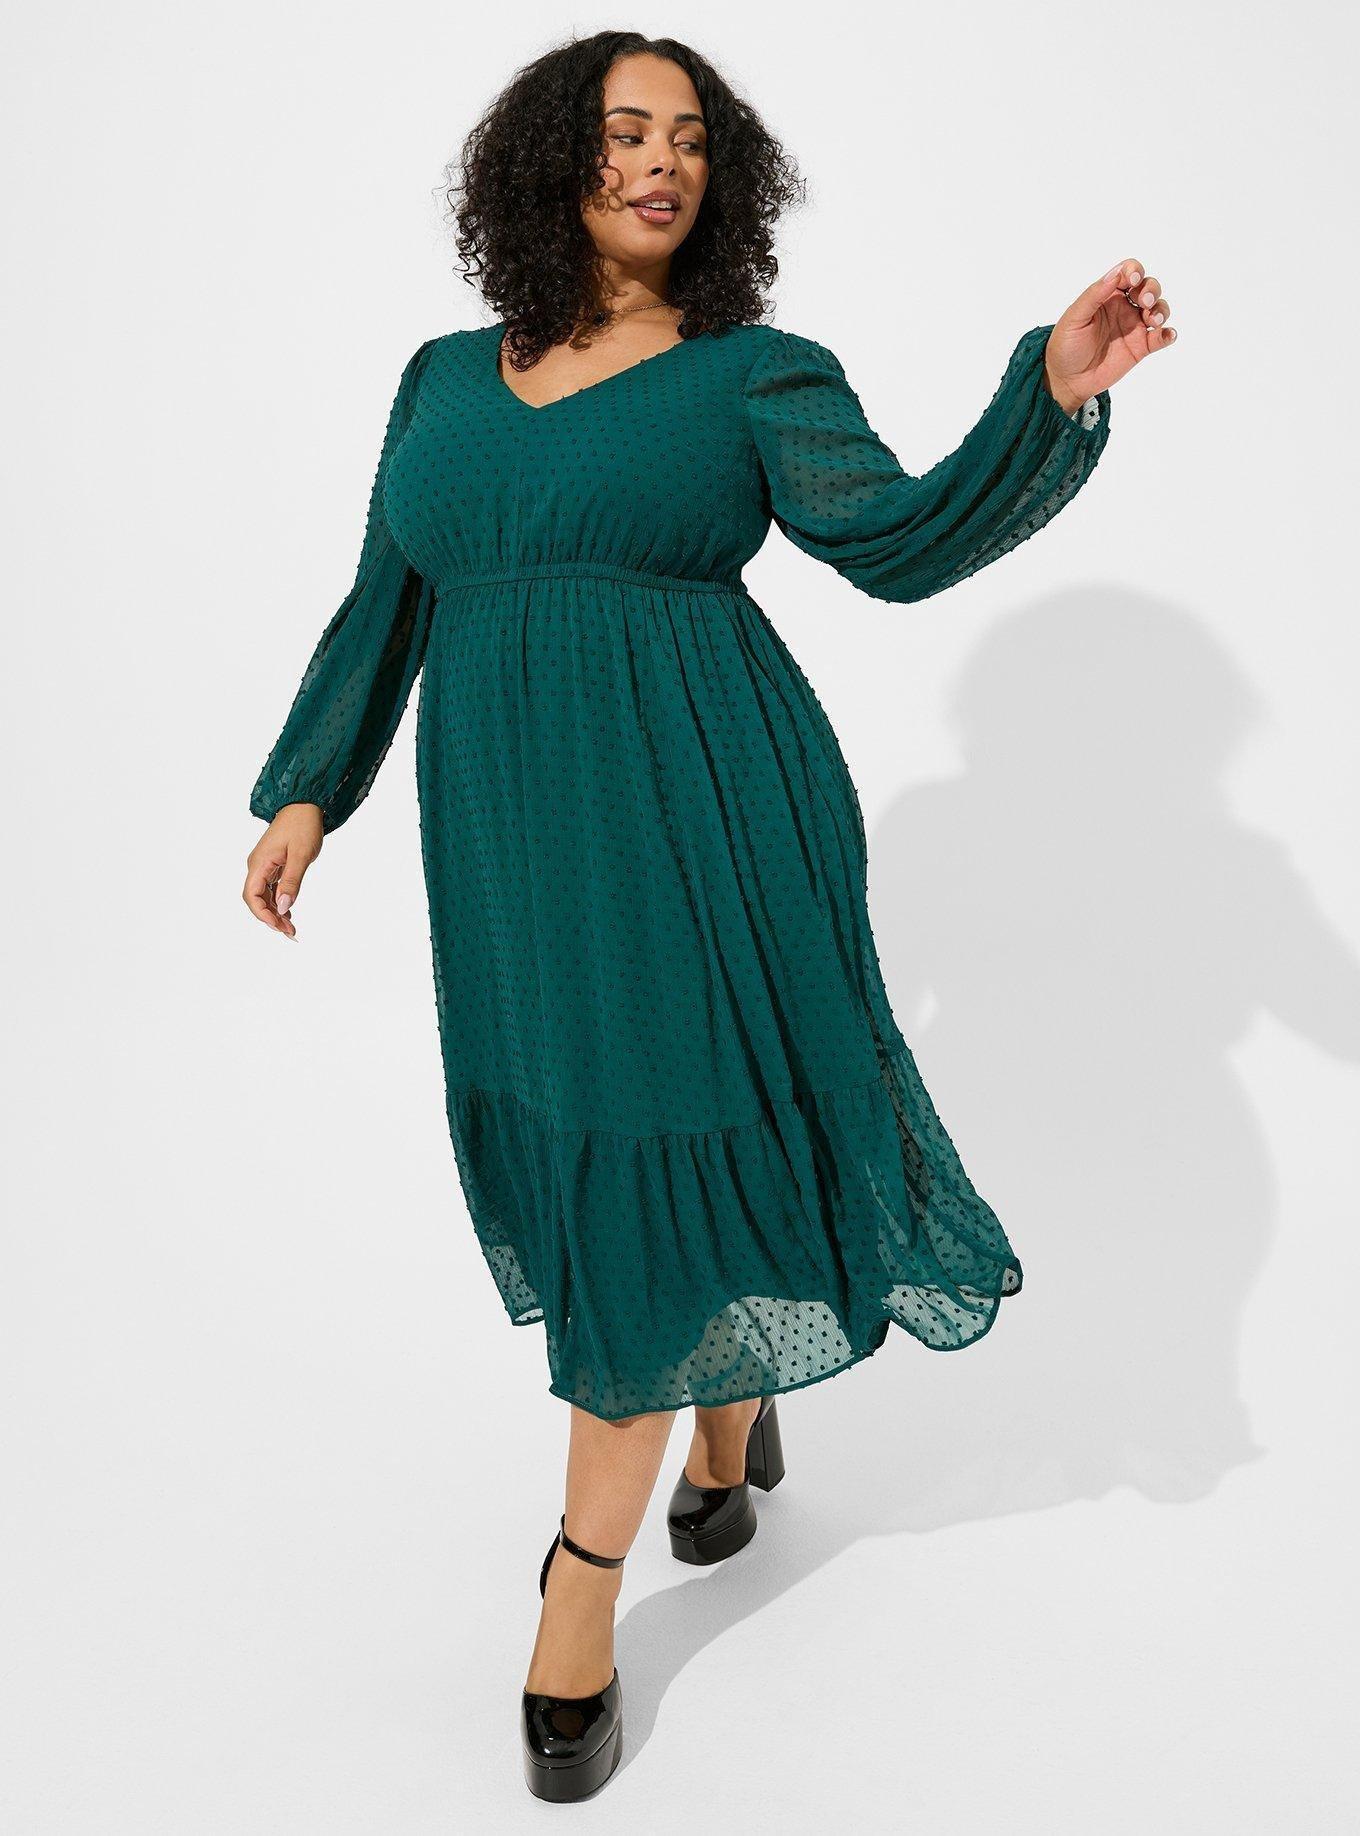 Buy Plus Size Women Dress Workplace Clothes 1X 2X 3X 4X 5X Full Sleeve Dress  Knee Length Casual Women Dress Fashion Fitted Dress Online in India 